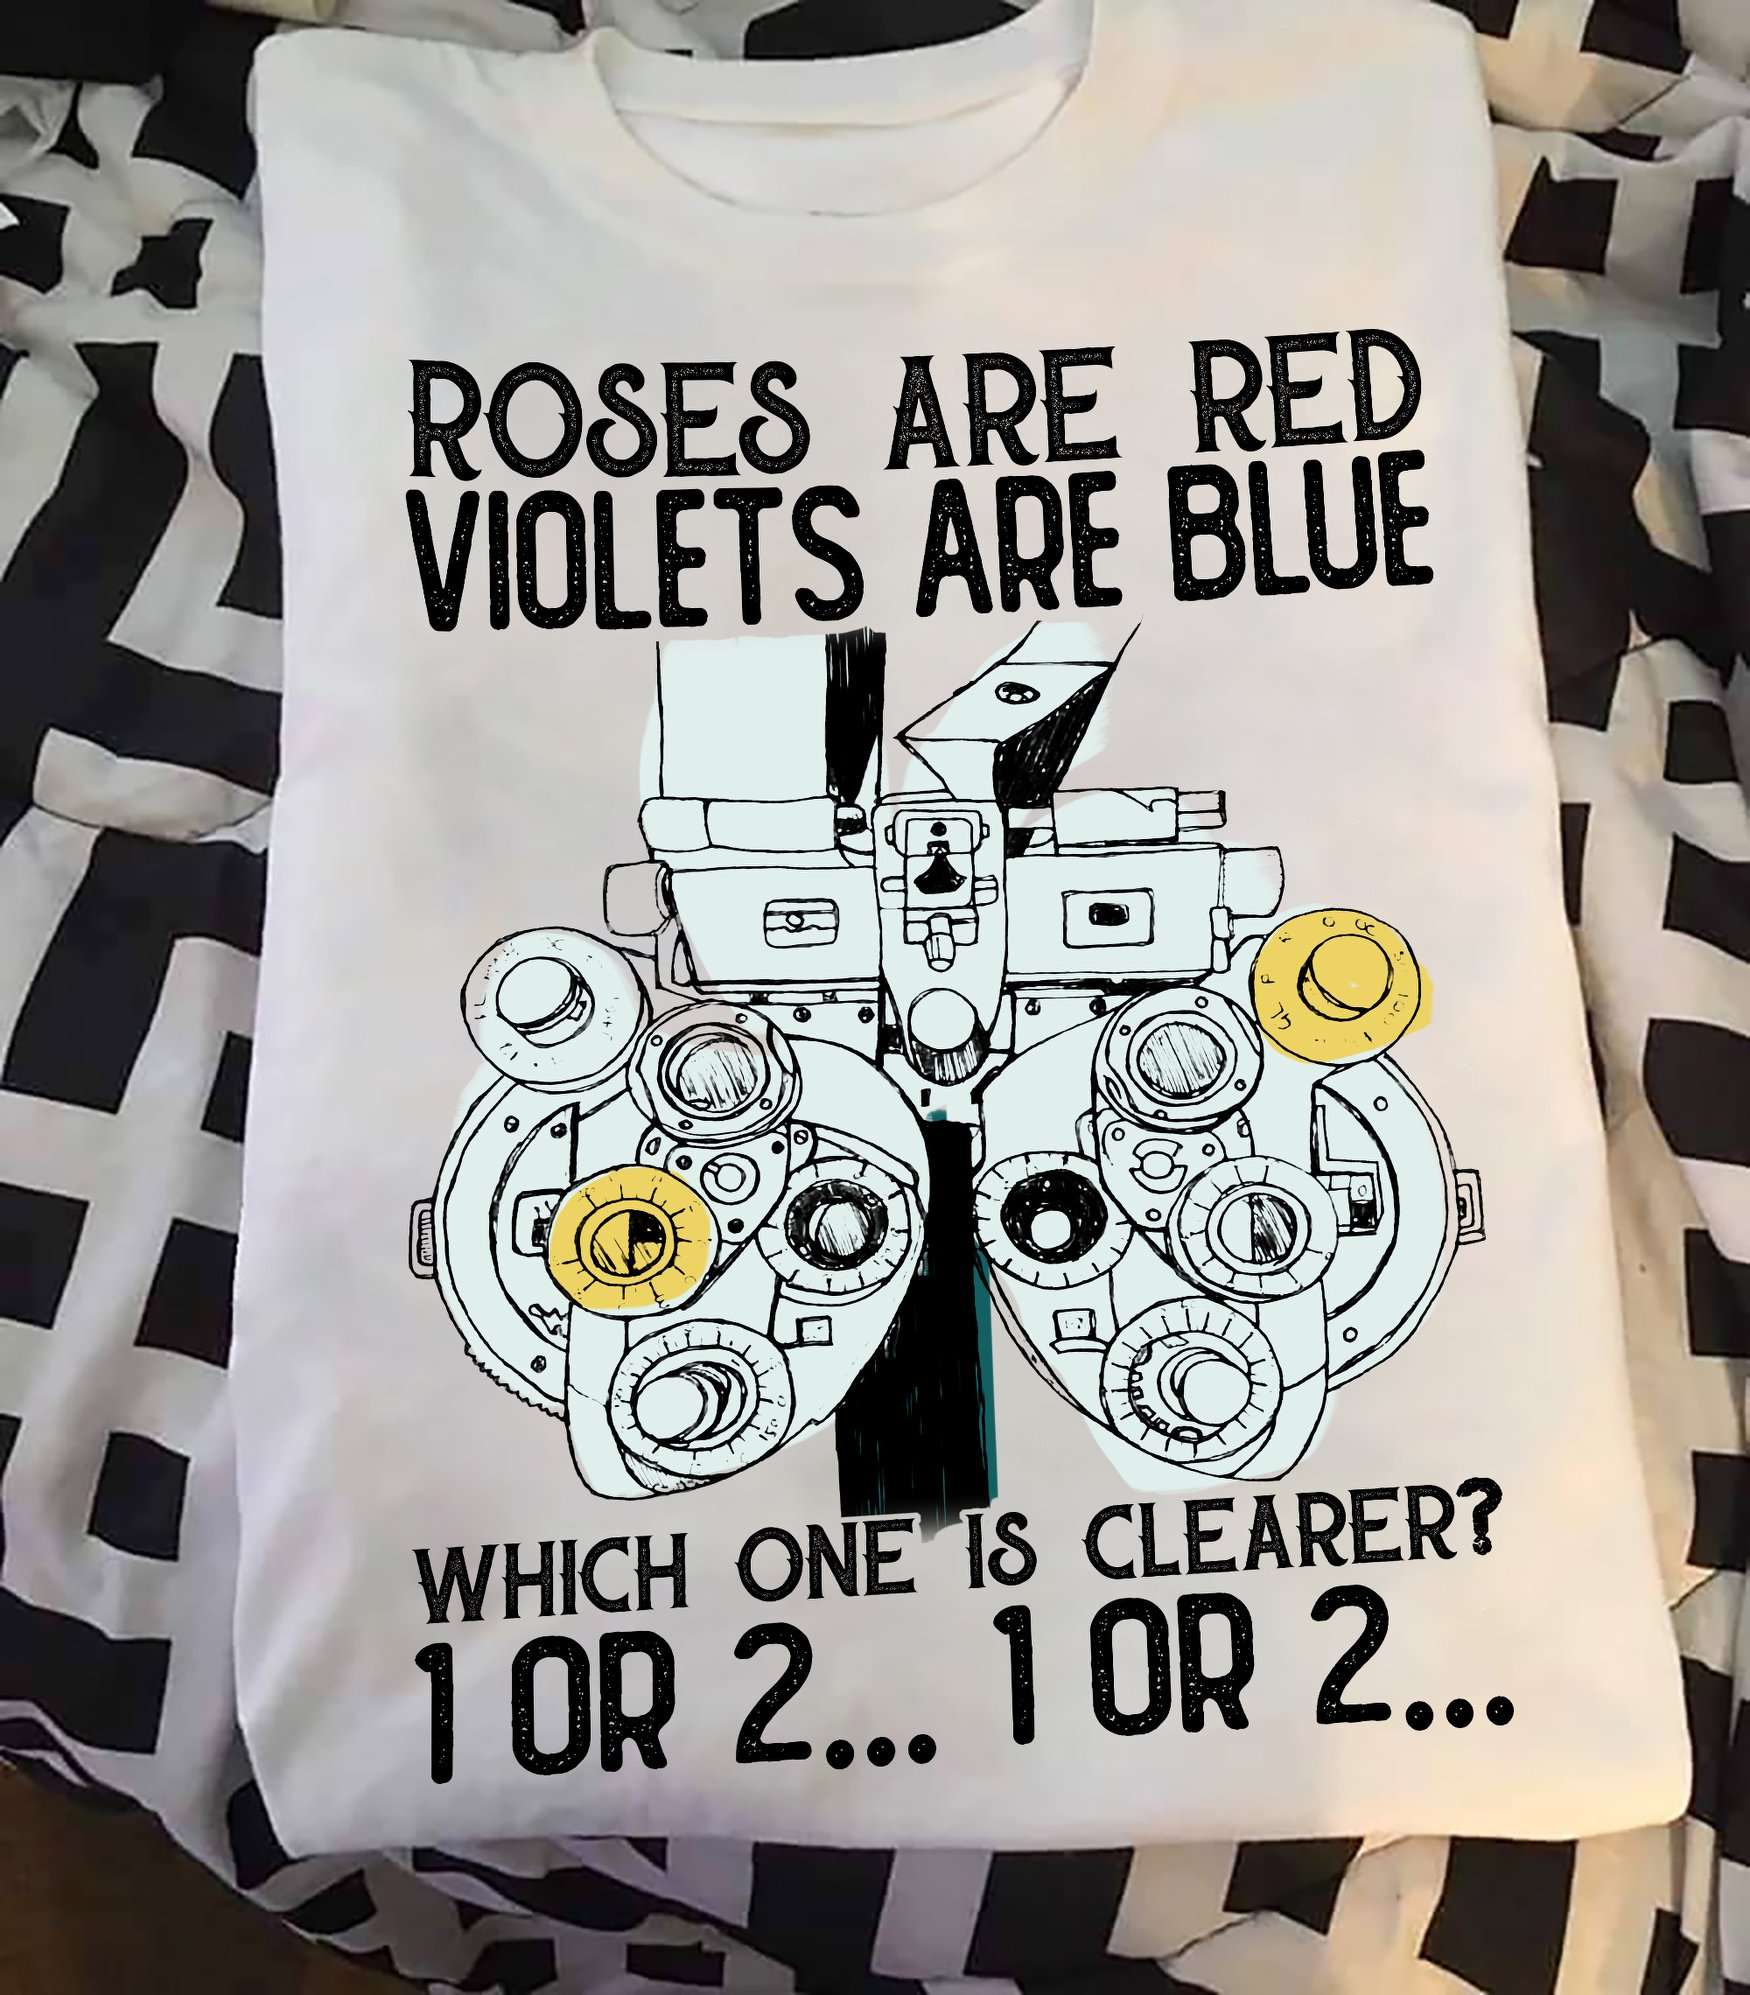 Eye Testing Machine - Roses are red violets are blue which one is clearer 1 or 2 1 or 2